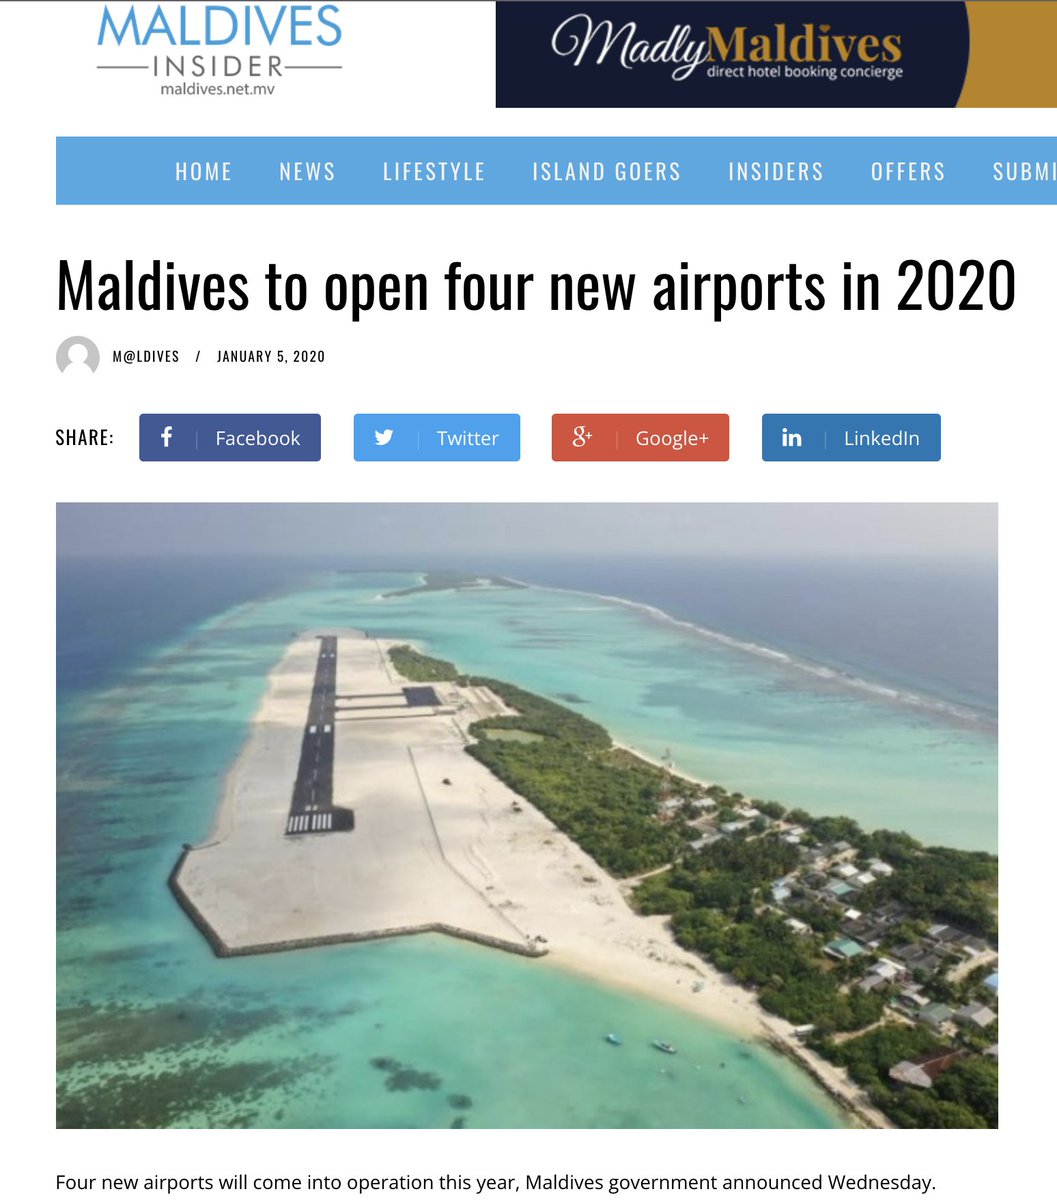 'But the end of the Maldives... could come sooner if drinking water supplies dry up by 1992, as predicted.' - The Canberra Times, 1988 #Catastrophizing